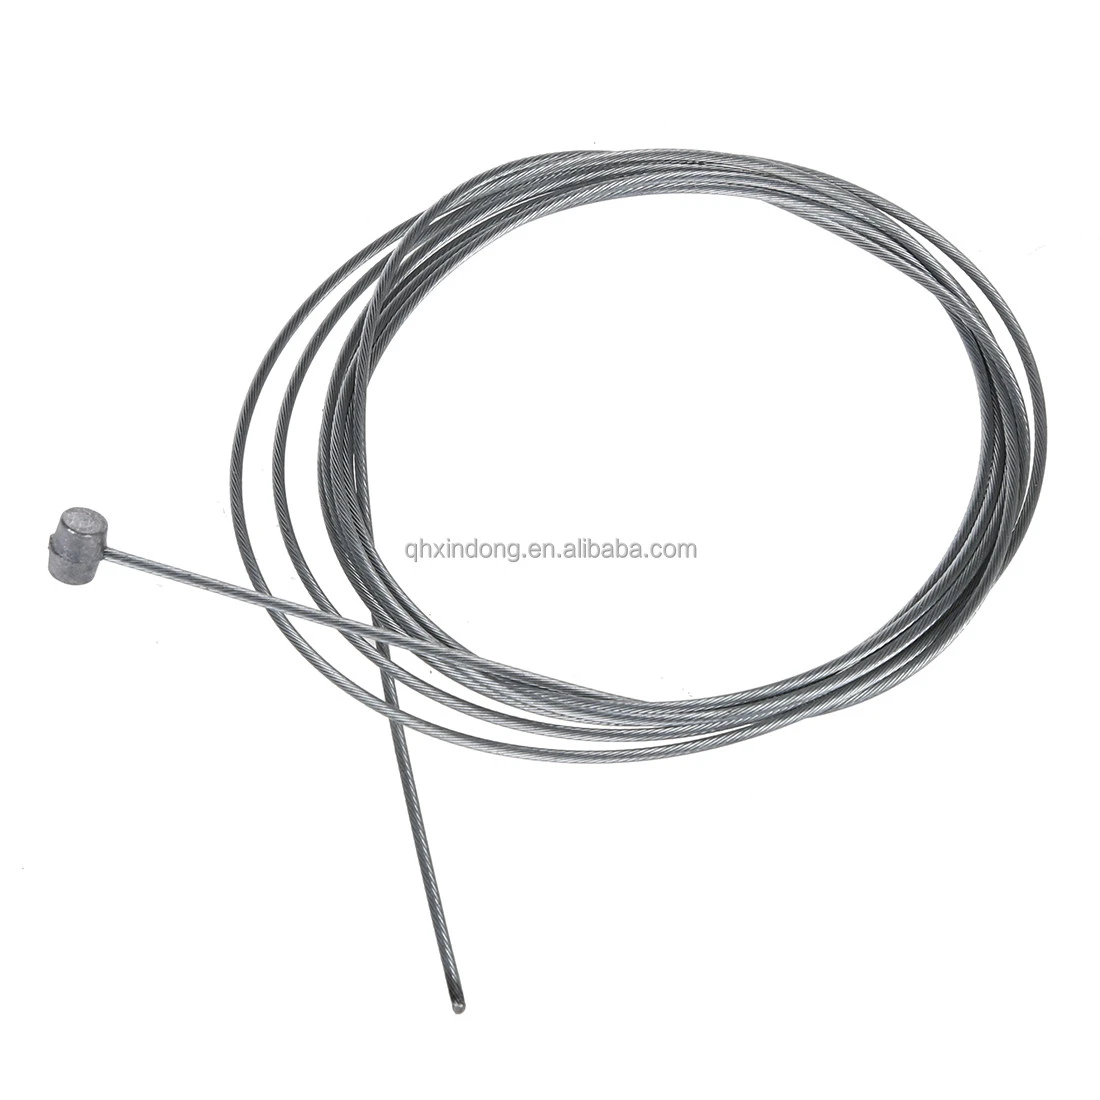 high quality galvanized steel changing a bike brake cable assembly